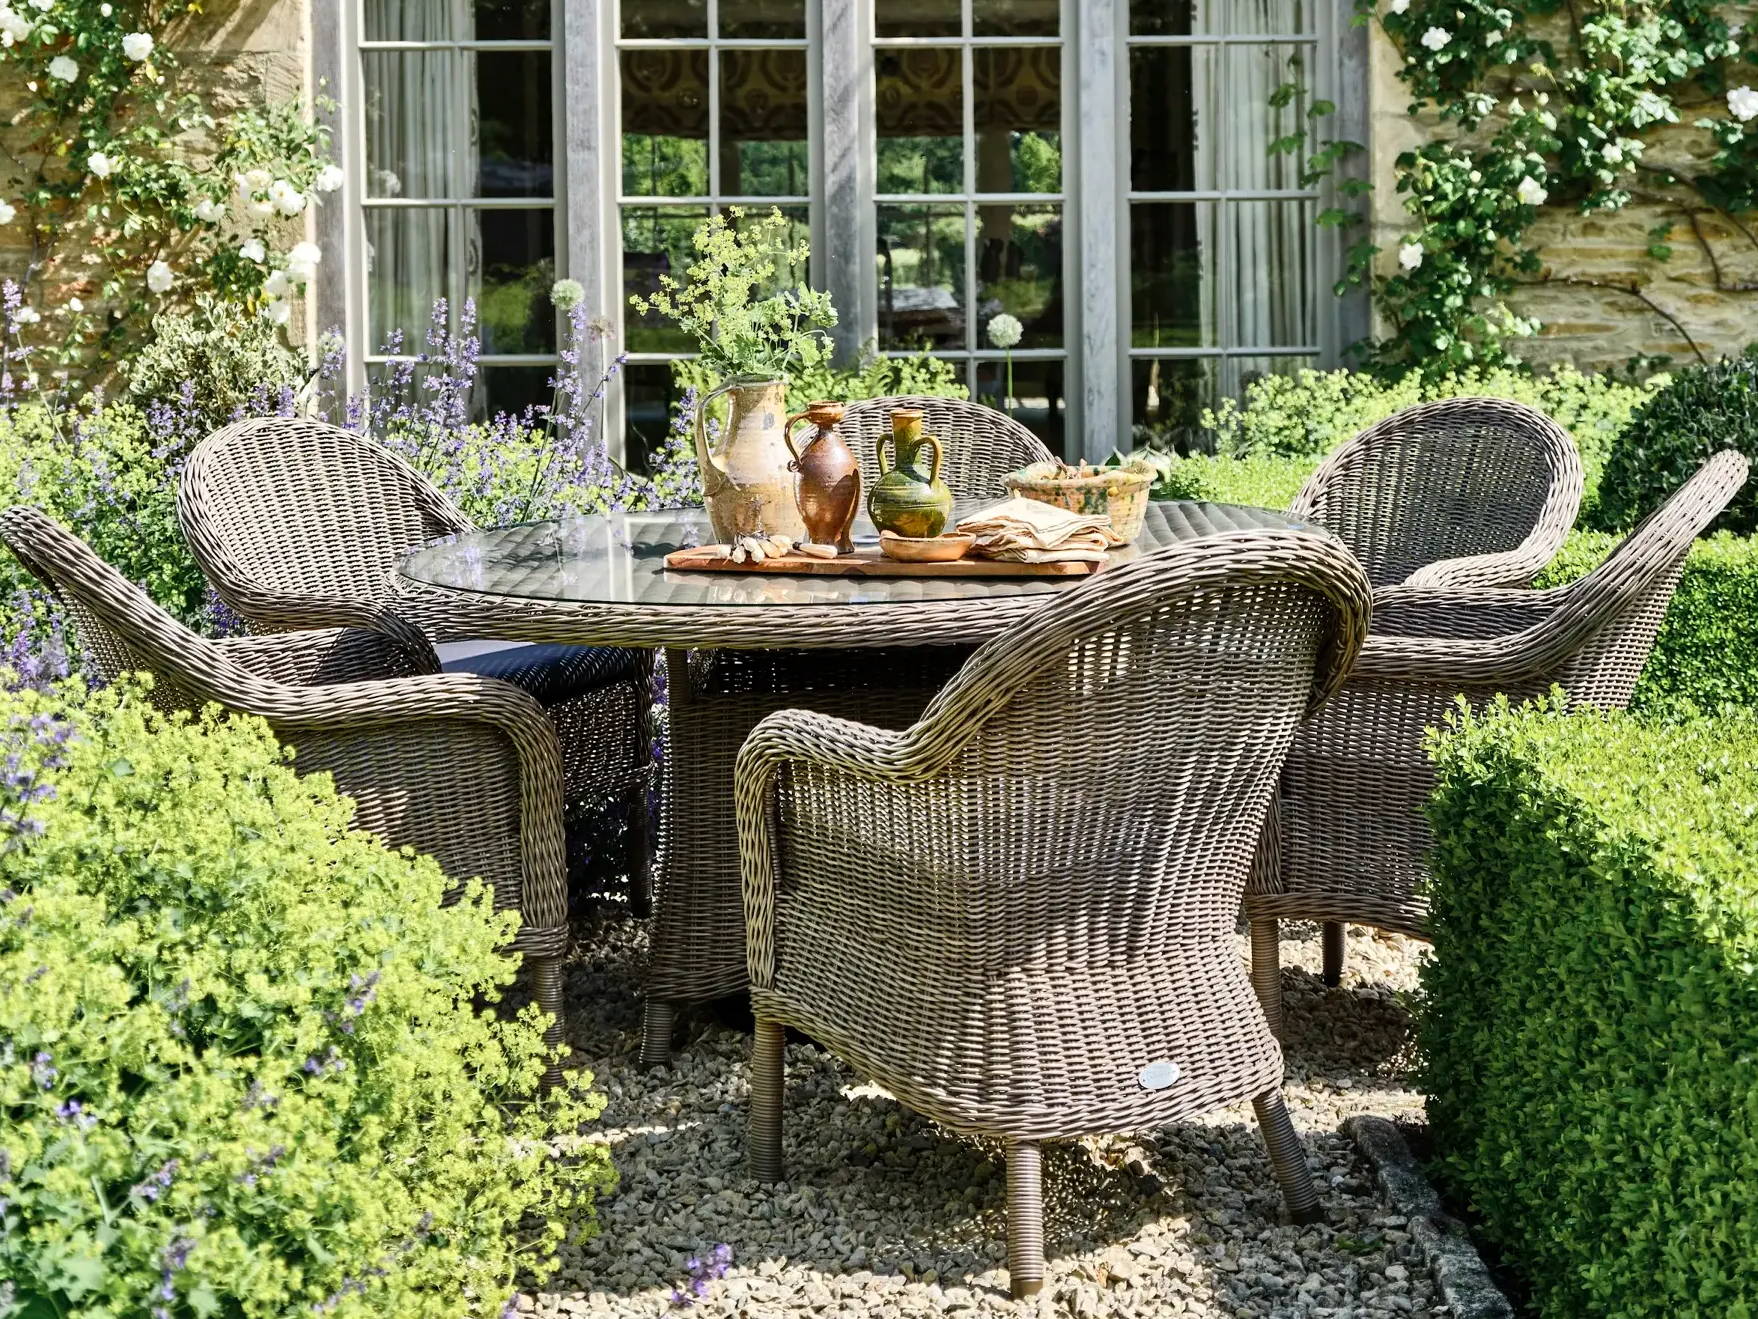 Garden rattan dining set with 6 dining armchairs and a round dining table surrounded by hedges.